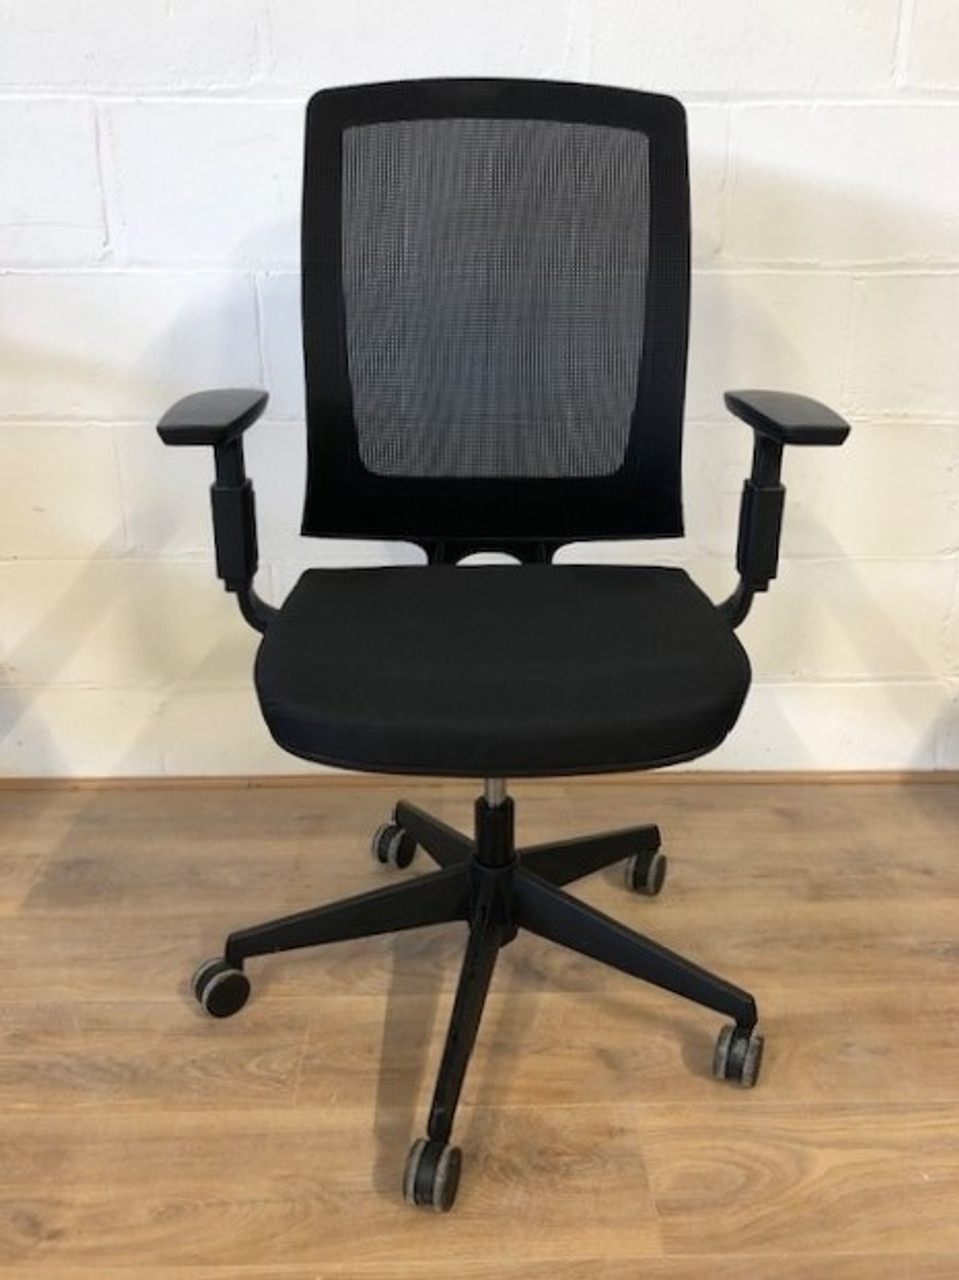 Hon Lota chairs_second hand office chairs to buy essex_used office furniture chelmsford essex_hon chairs to buy used essex_office furniture chelmsford